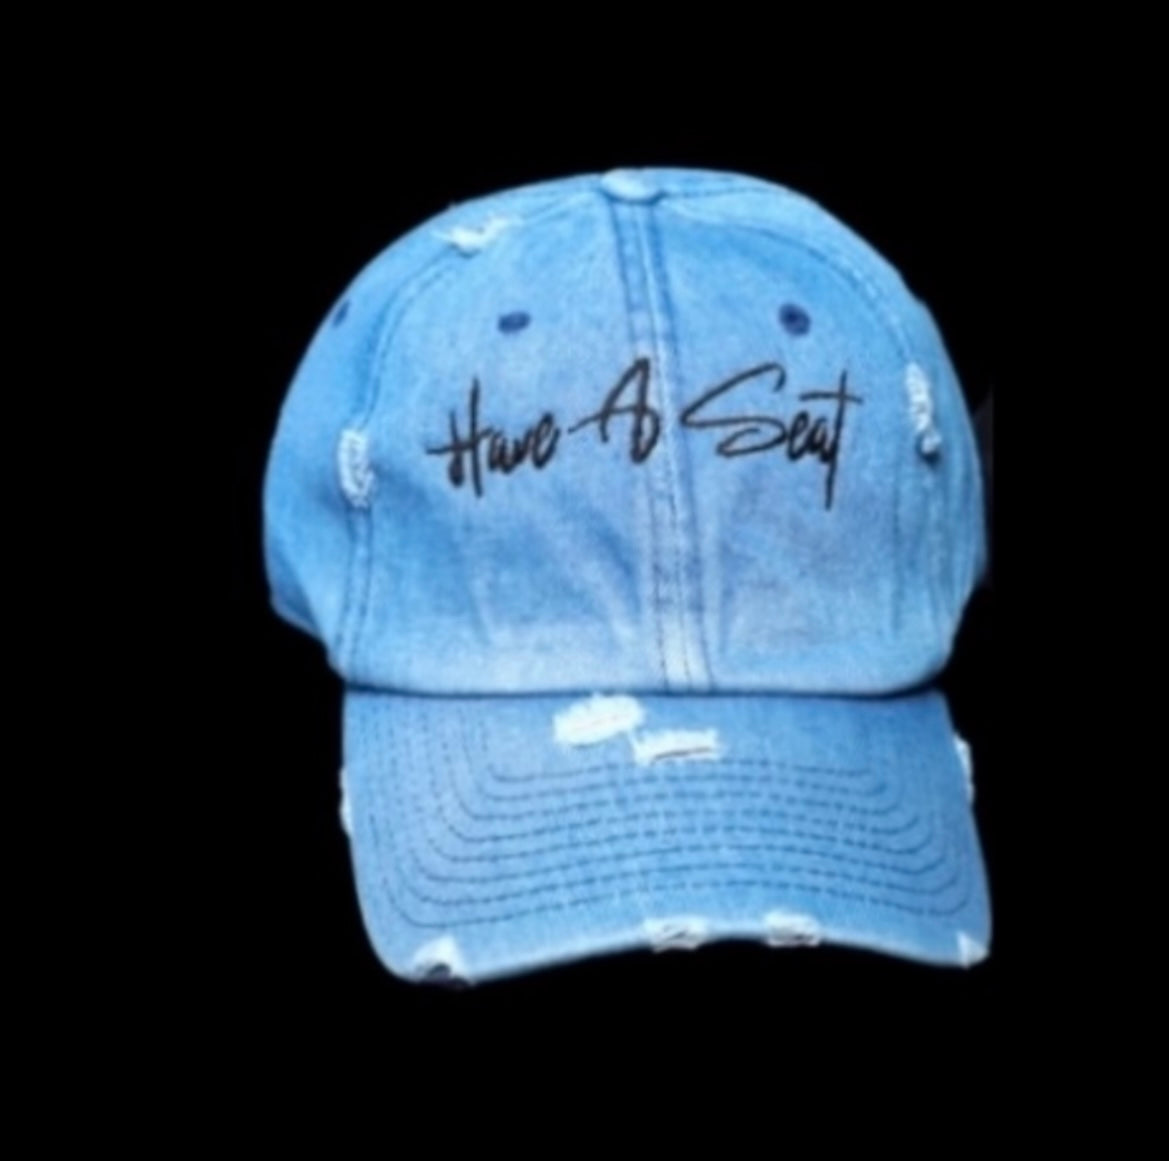 Have A Seat - Dad Hat